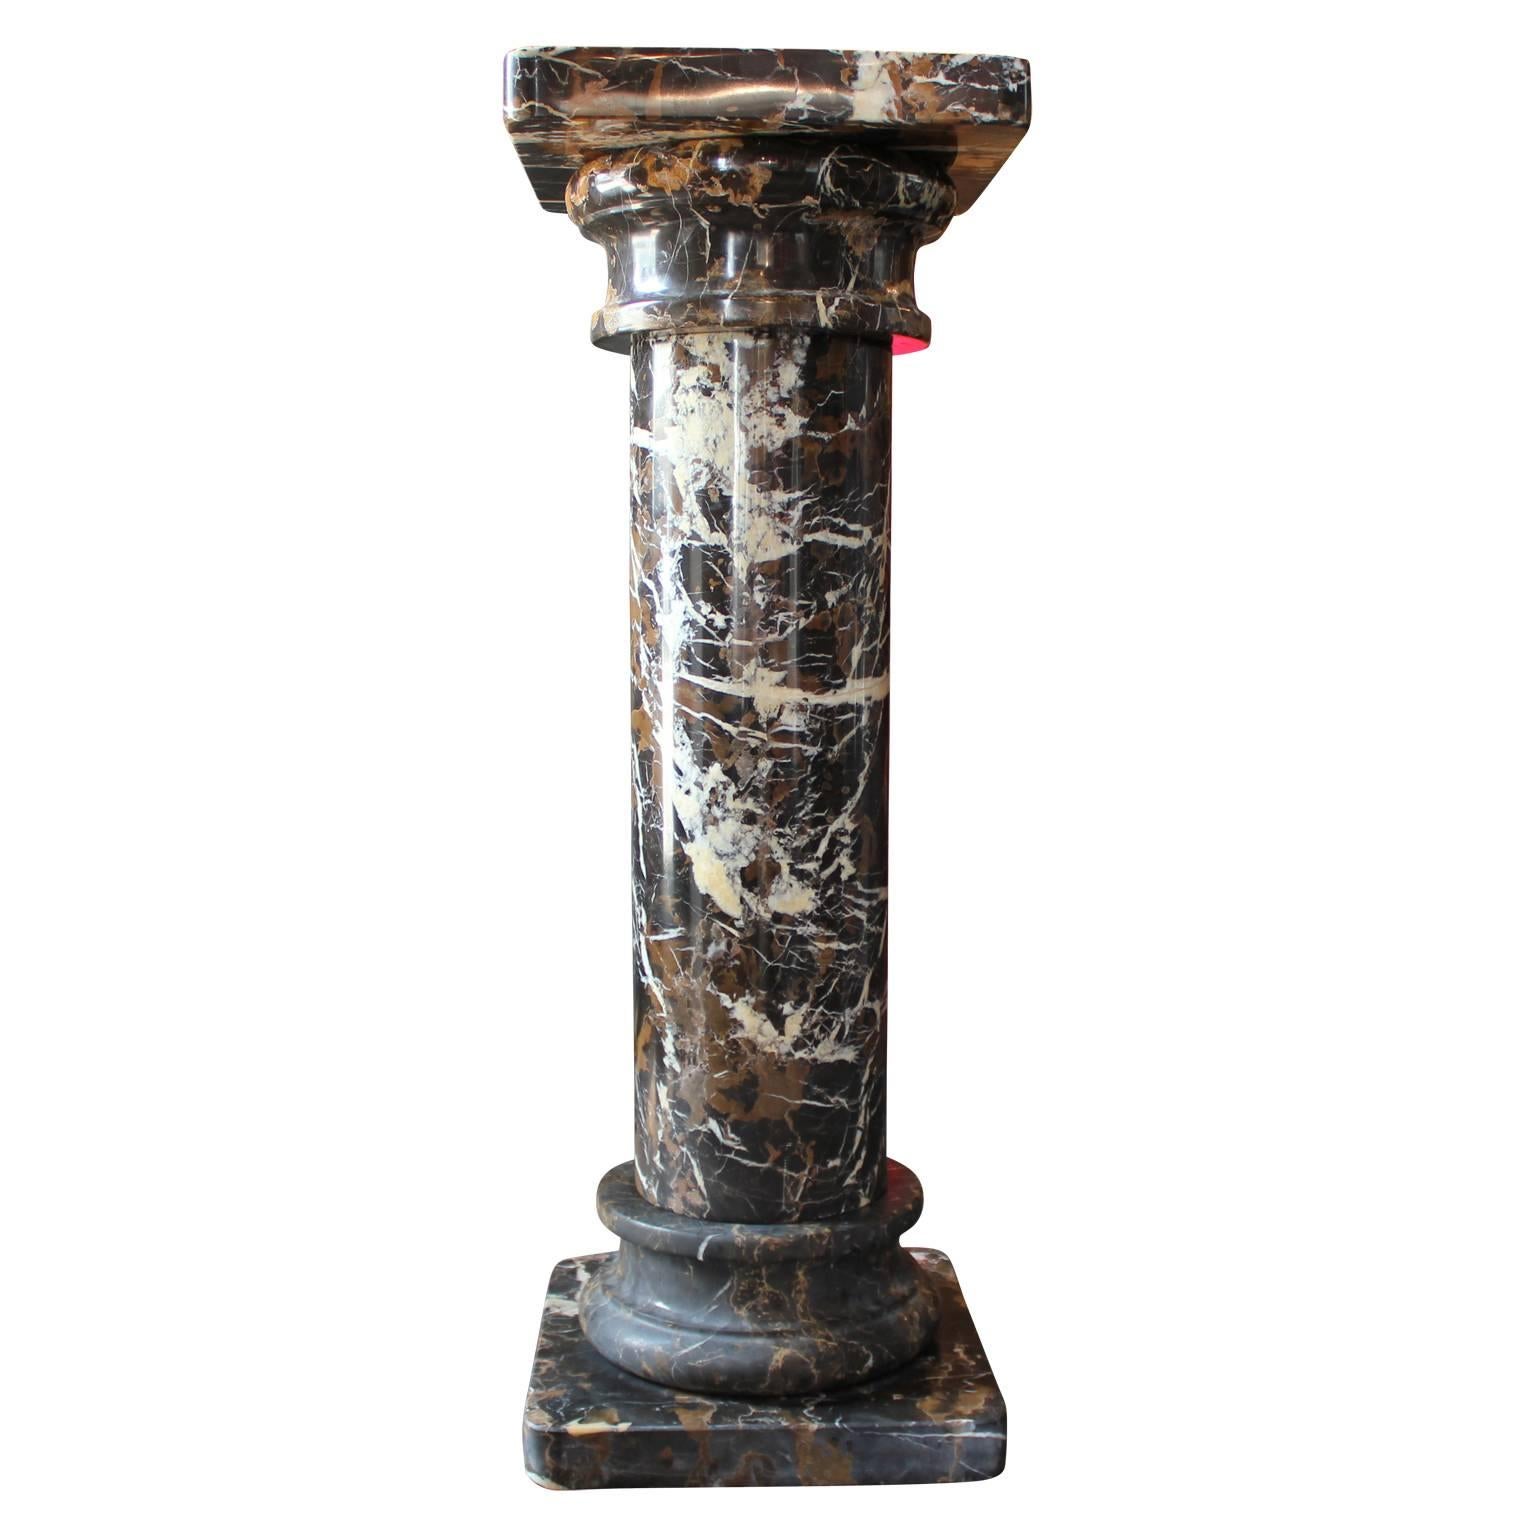 Gorgeous marble display or pedestal. Deep brown and black detail within the marble. Can be used as a pedestal or display for art and other objects.